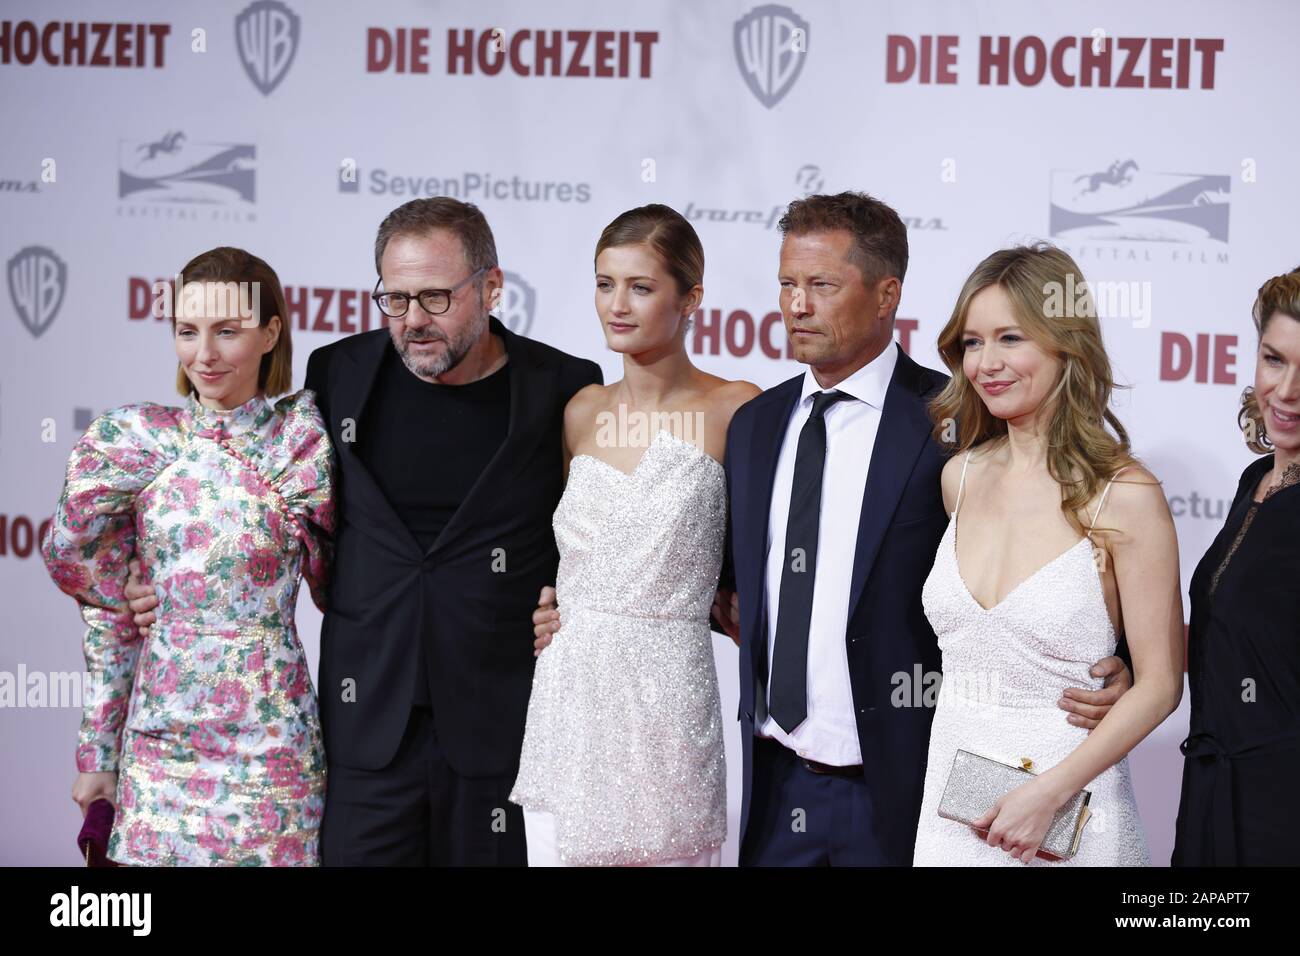 Berlin, Germany. 21st Jan, 2020. Berlin:The photo shows actors Katharina Schüttler, Samuel Finzi, Lilli Schweiger, Til Schweiger, Stefanie Stappenbeck on the red carpet in front of the Zoo Palace. (Photo by Simone Kuhlmey/Pacific Press) Credit: Pacific Press Agency/Alamy Live News Stock Photo